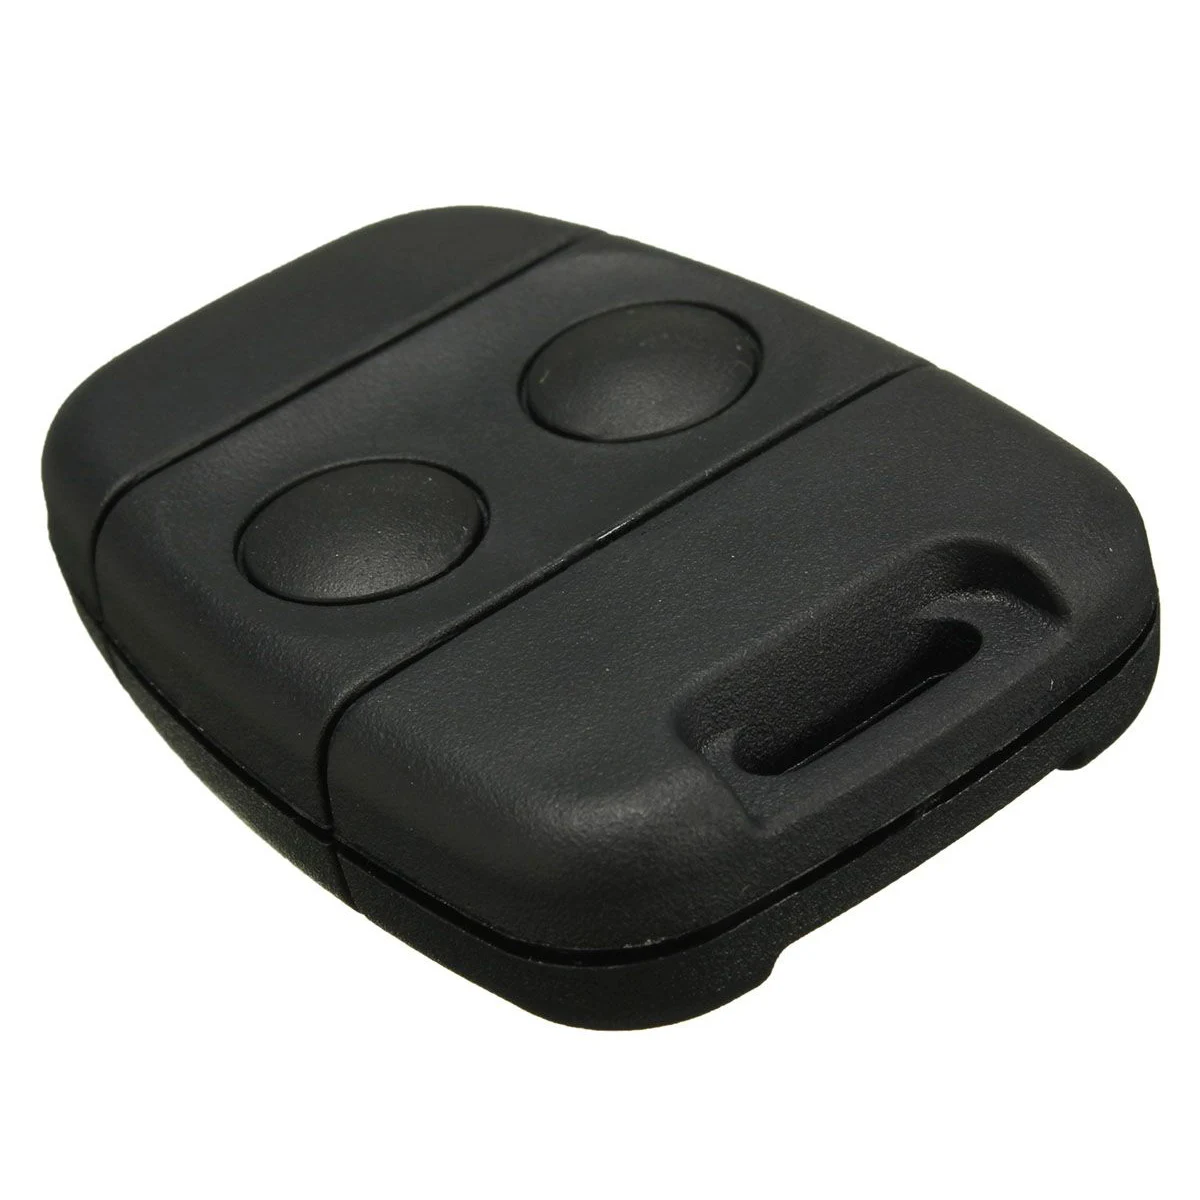 

BLACK HOUSING COVER Key Remote for MG ZR ZS 100 200 400 25